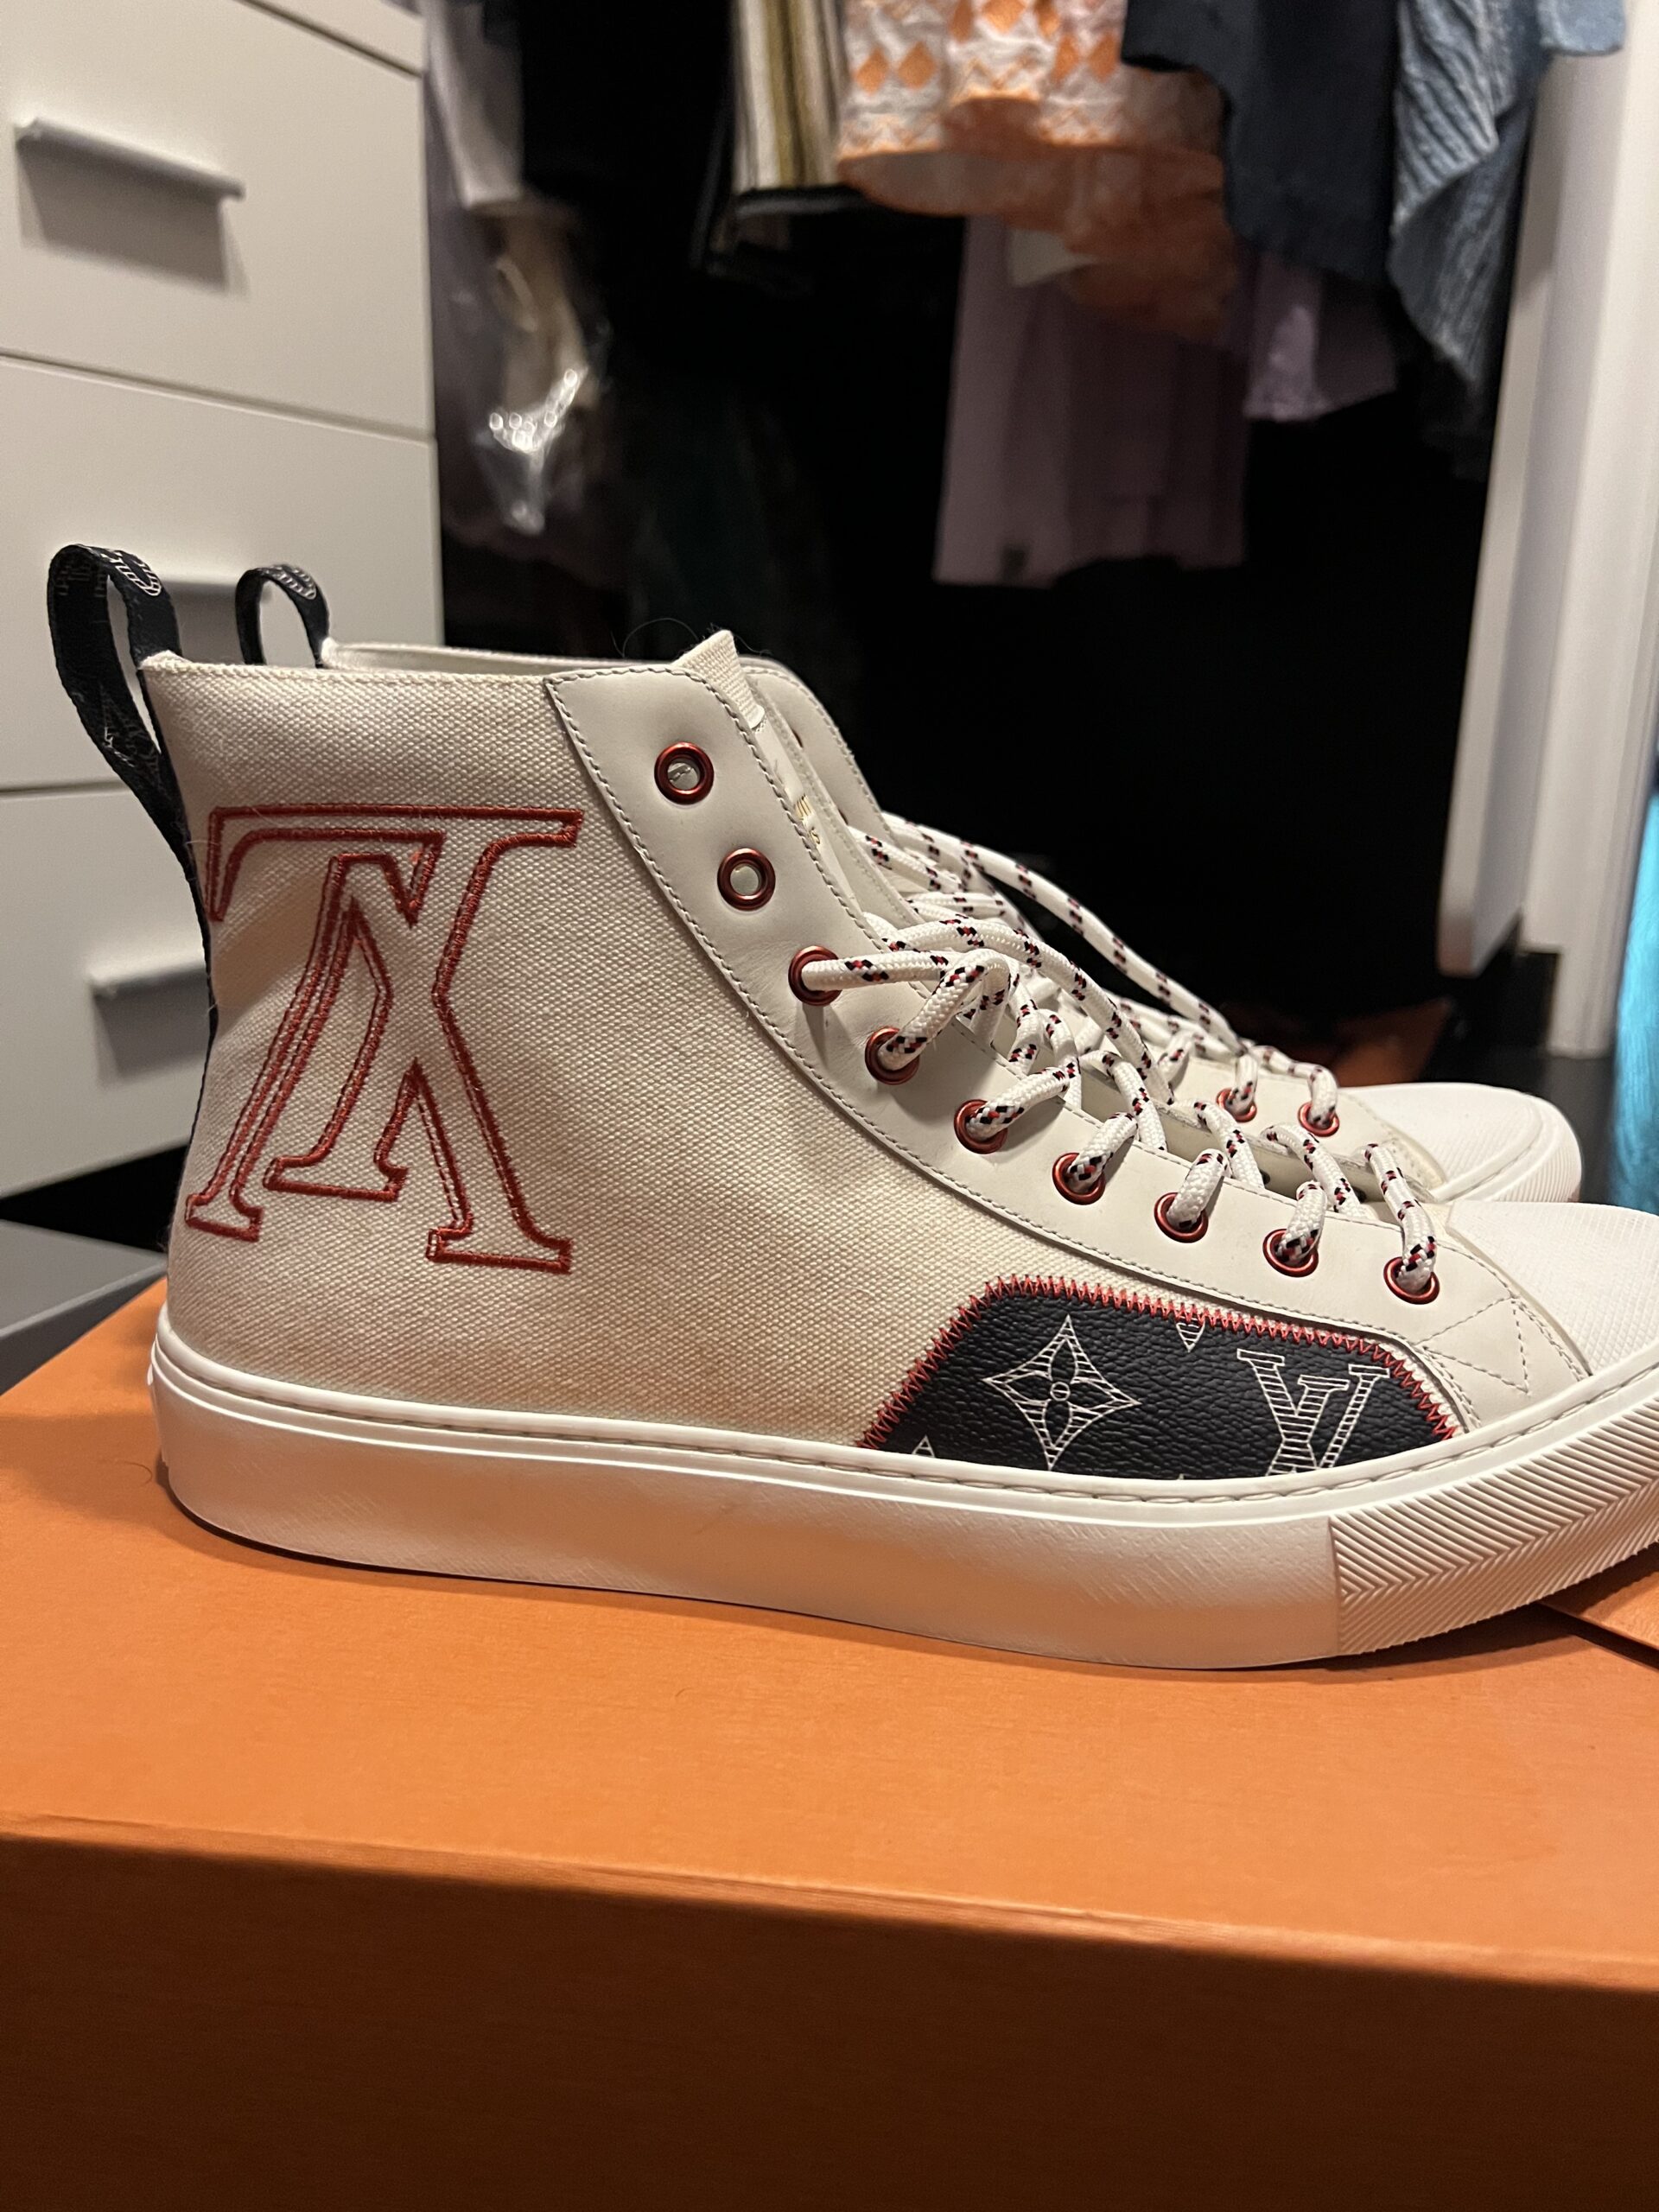 Louis Vuitton White Tattoo High Top Sneaker Boot - 11 – I MISS YOU VINTAGE